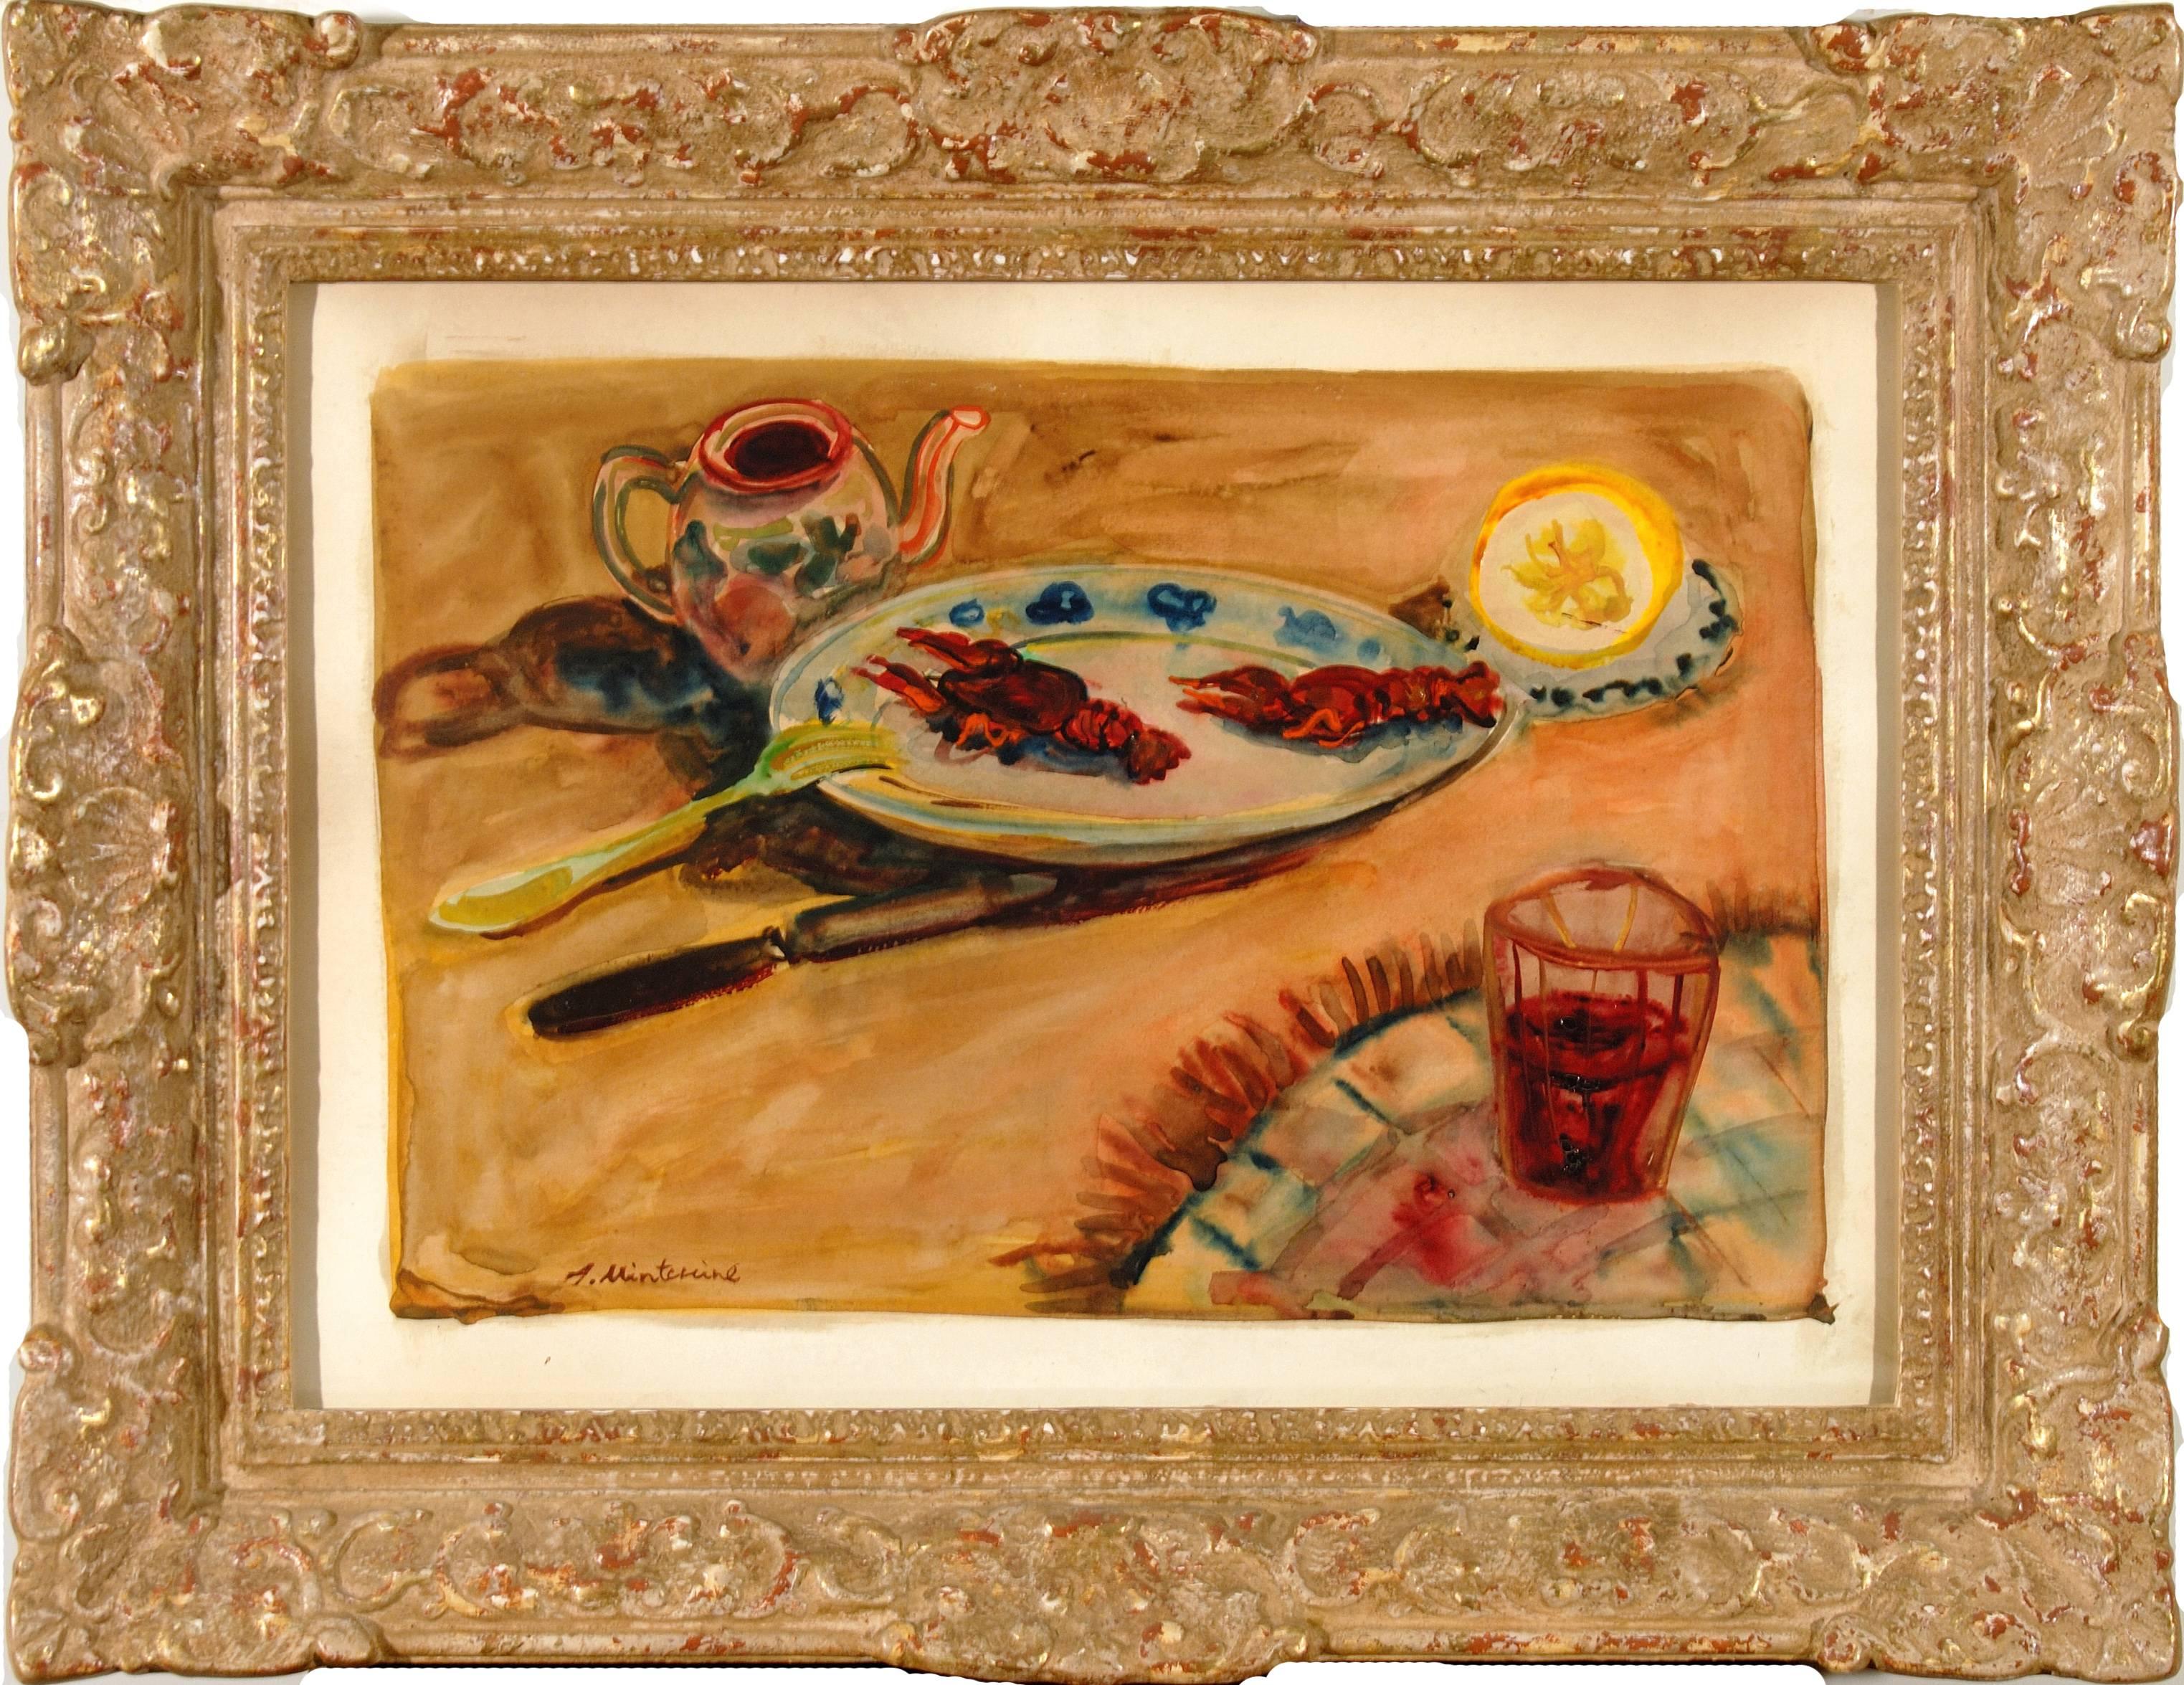 Abraham Mintchine (1898-1931) Still Life, mixed media gouache on cardboard applied on canvas, signed lower left.

SIZE: cm. 44 x 62 X 0.1 - SIZE WITH FRAME: cm. 61 x 78 x 5

Certificate of Authenticity:
Massimo di Veroli, Paris, France;
Galleria